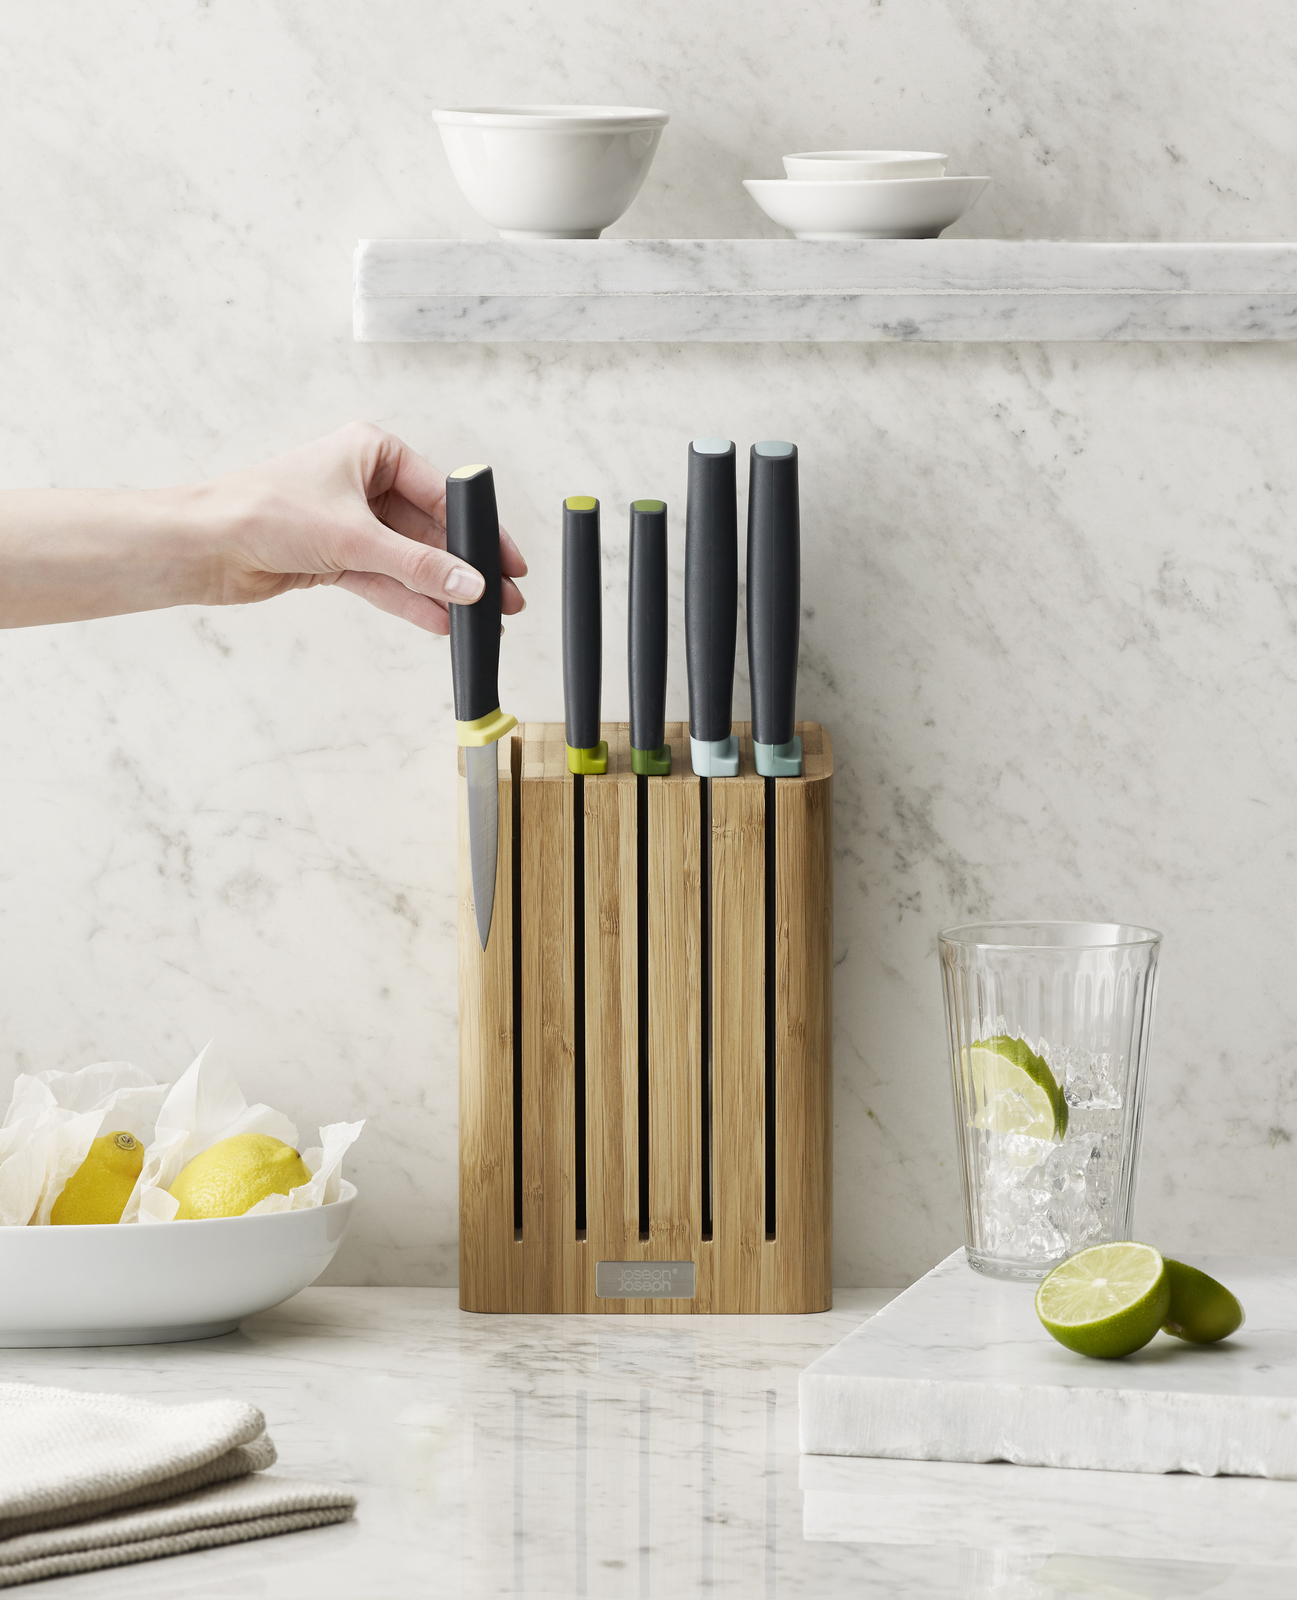 https://3fa-media.com/joseph-joseph/joseph-joseph-elevate-knife-block-with-five-knives__73274_f488eb1-s2500x2500.jpg